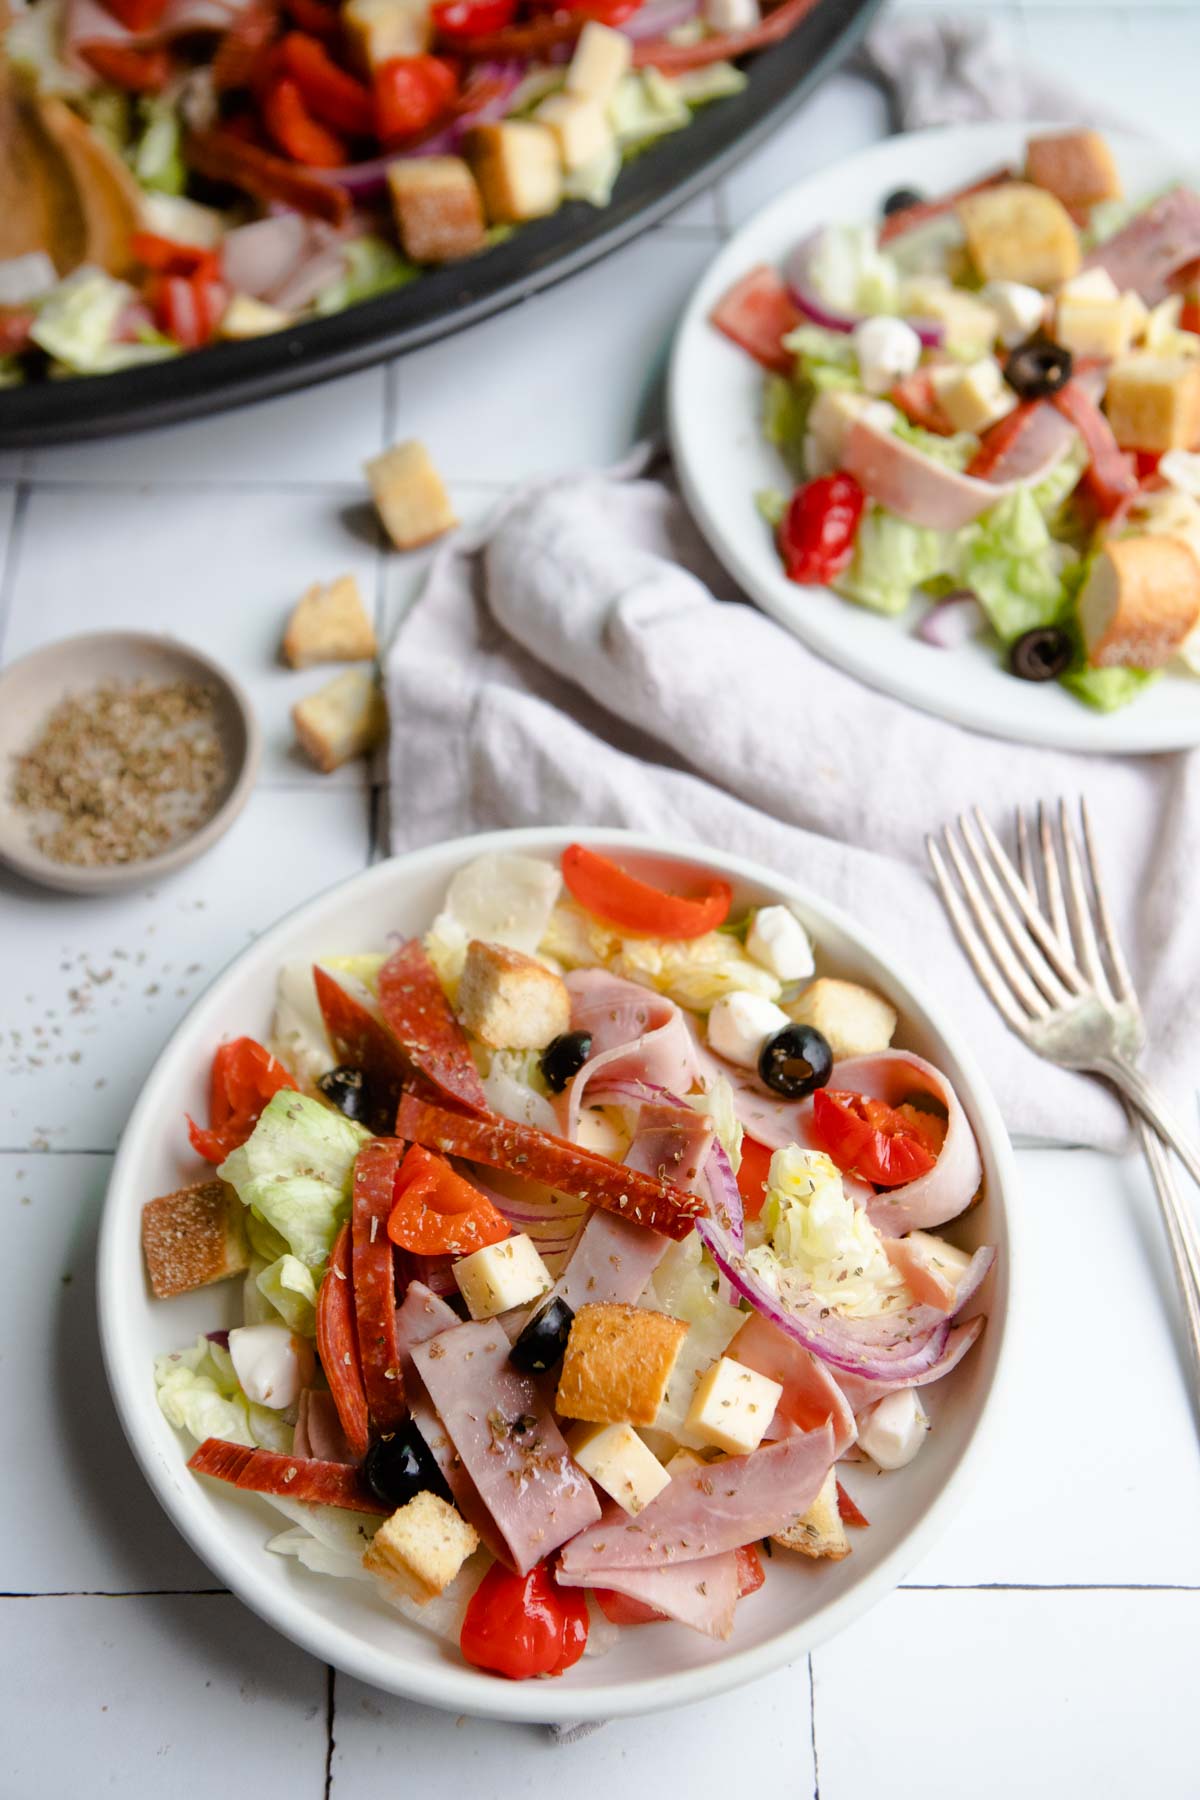 Italian sub salad with homemade croutons served on 2 white plates 